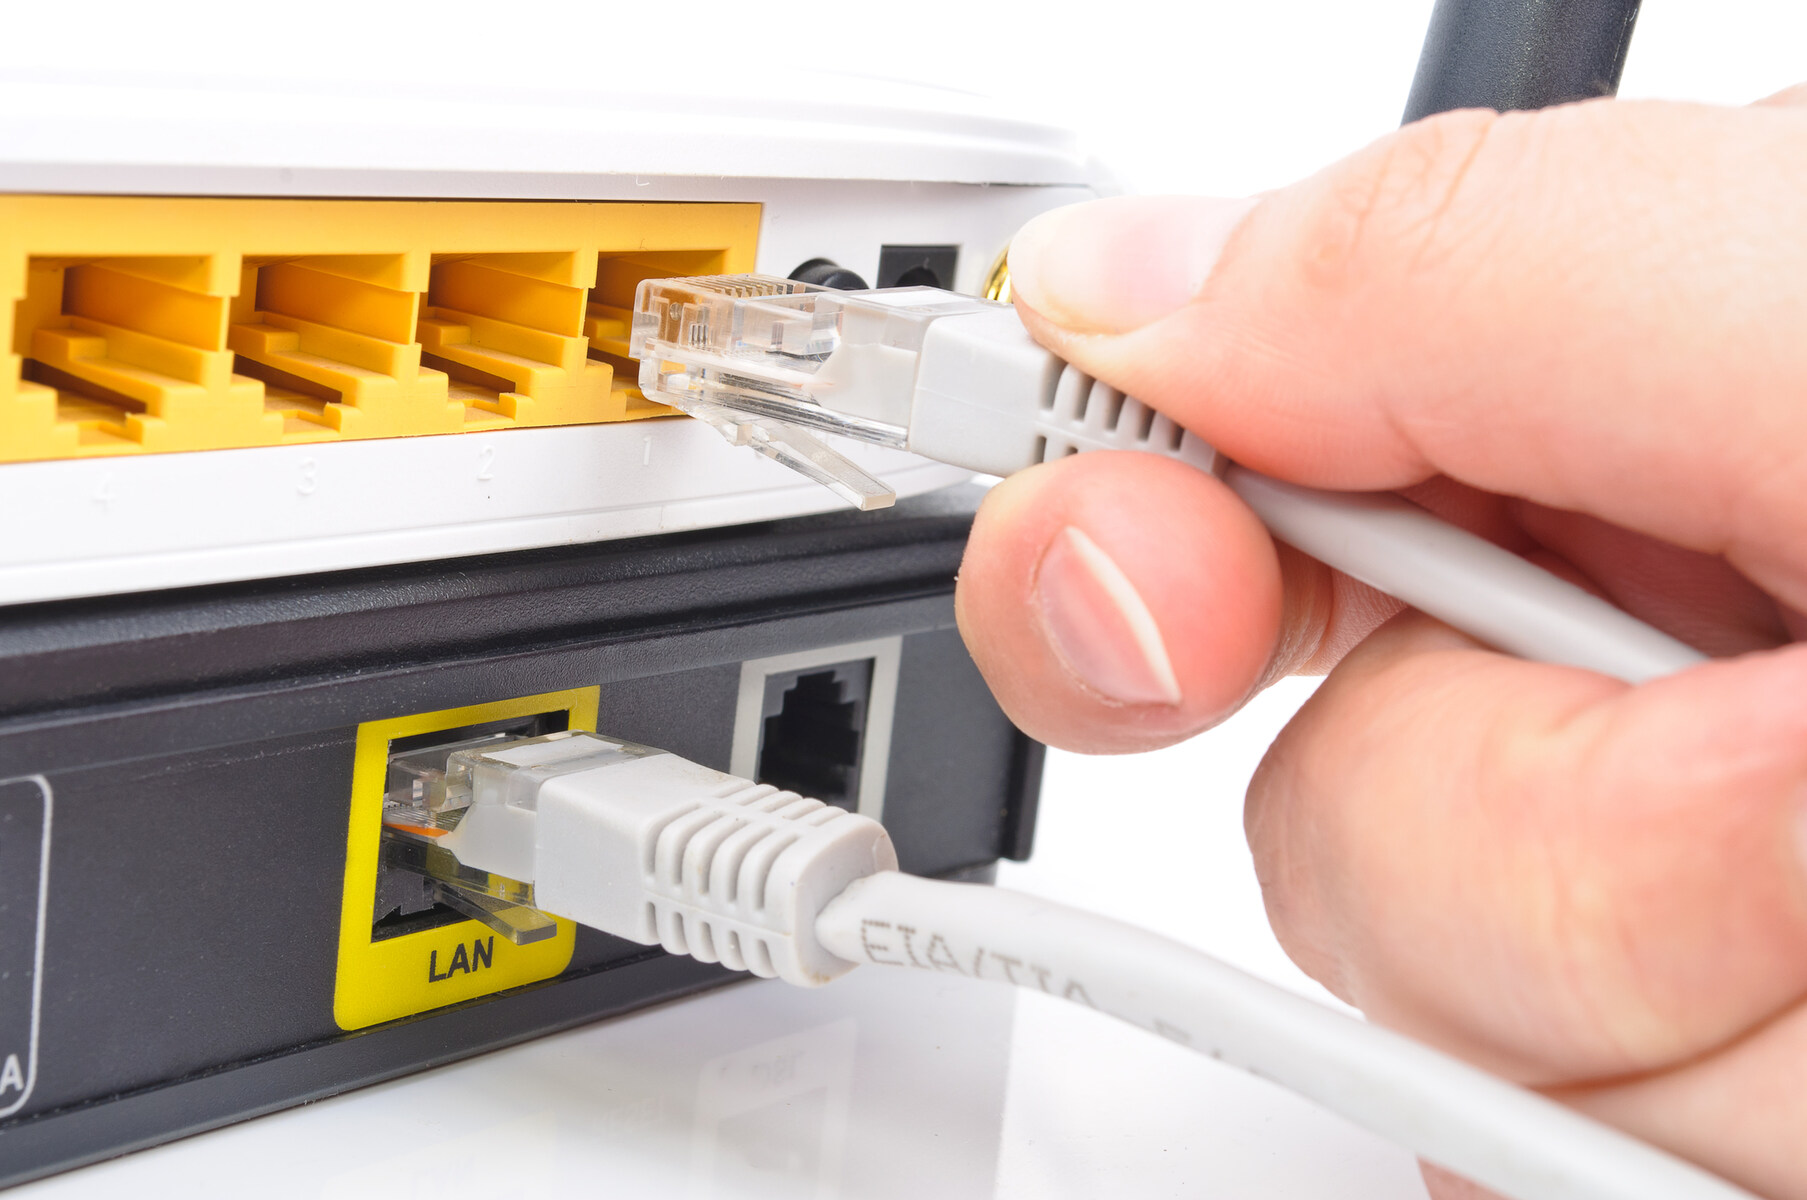 setting-up-network-switch-to-shut-off-port-when-a-certain-device-is-connected-to-the-network